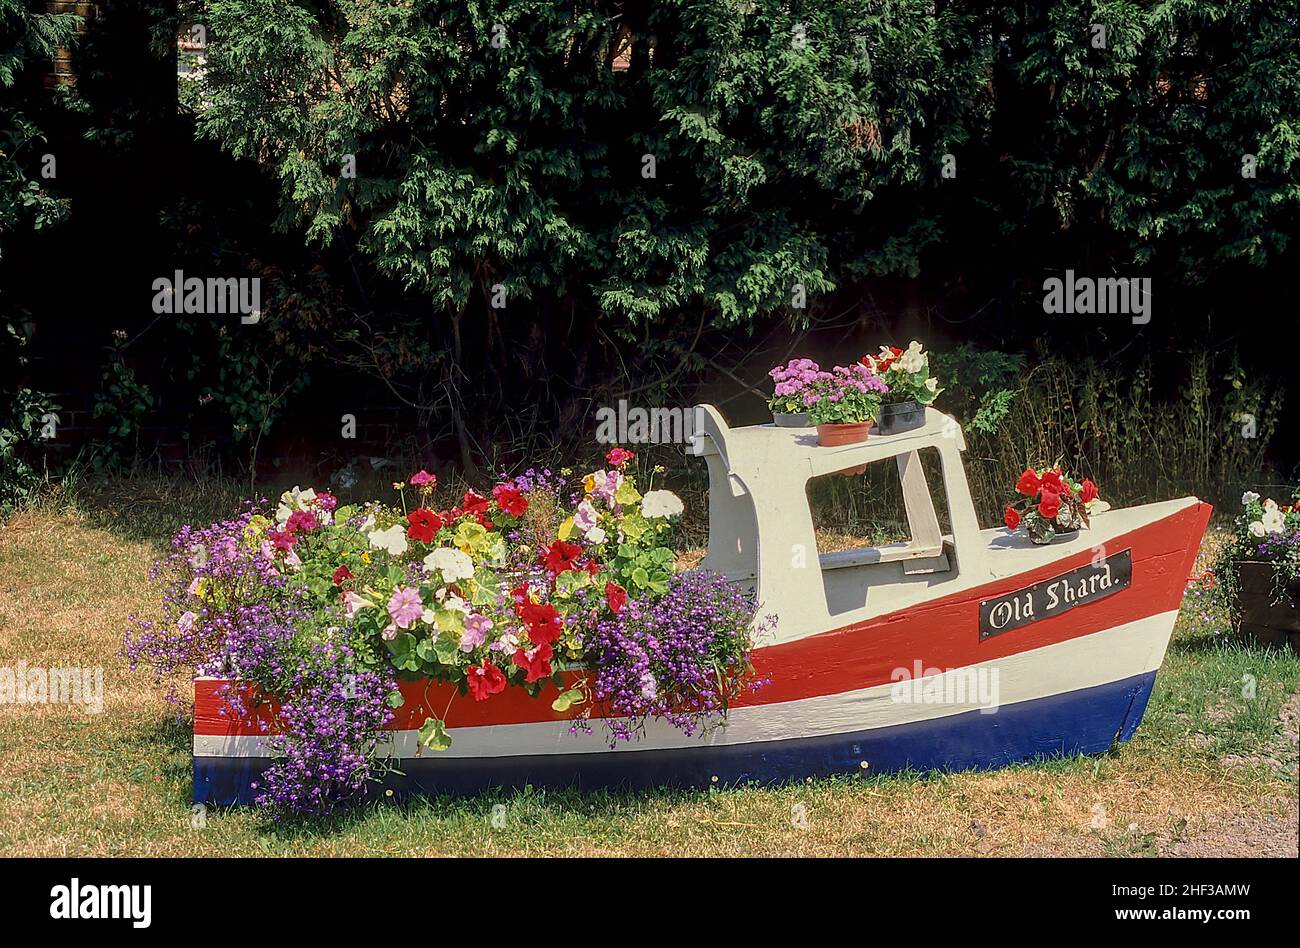 Small boat used for a roadside flower display. Named Old Shard after old toll bridge was demolished and replaced by new modern toll free bridge. Stock Photo